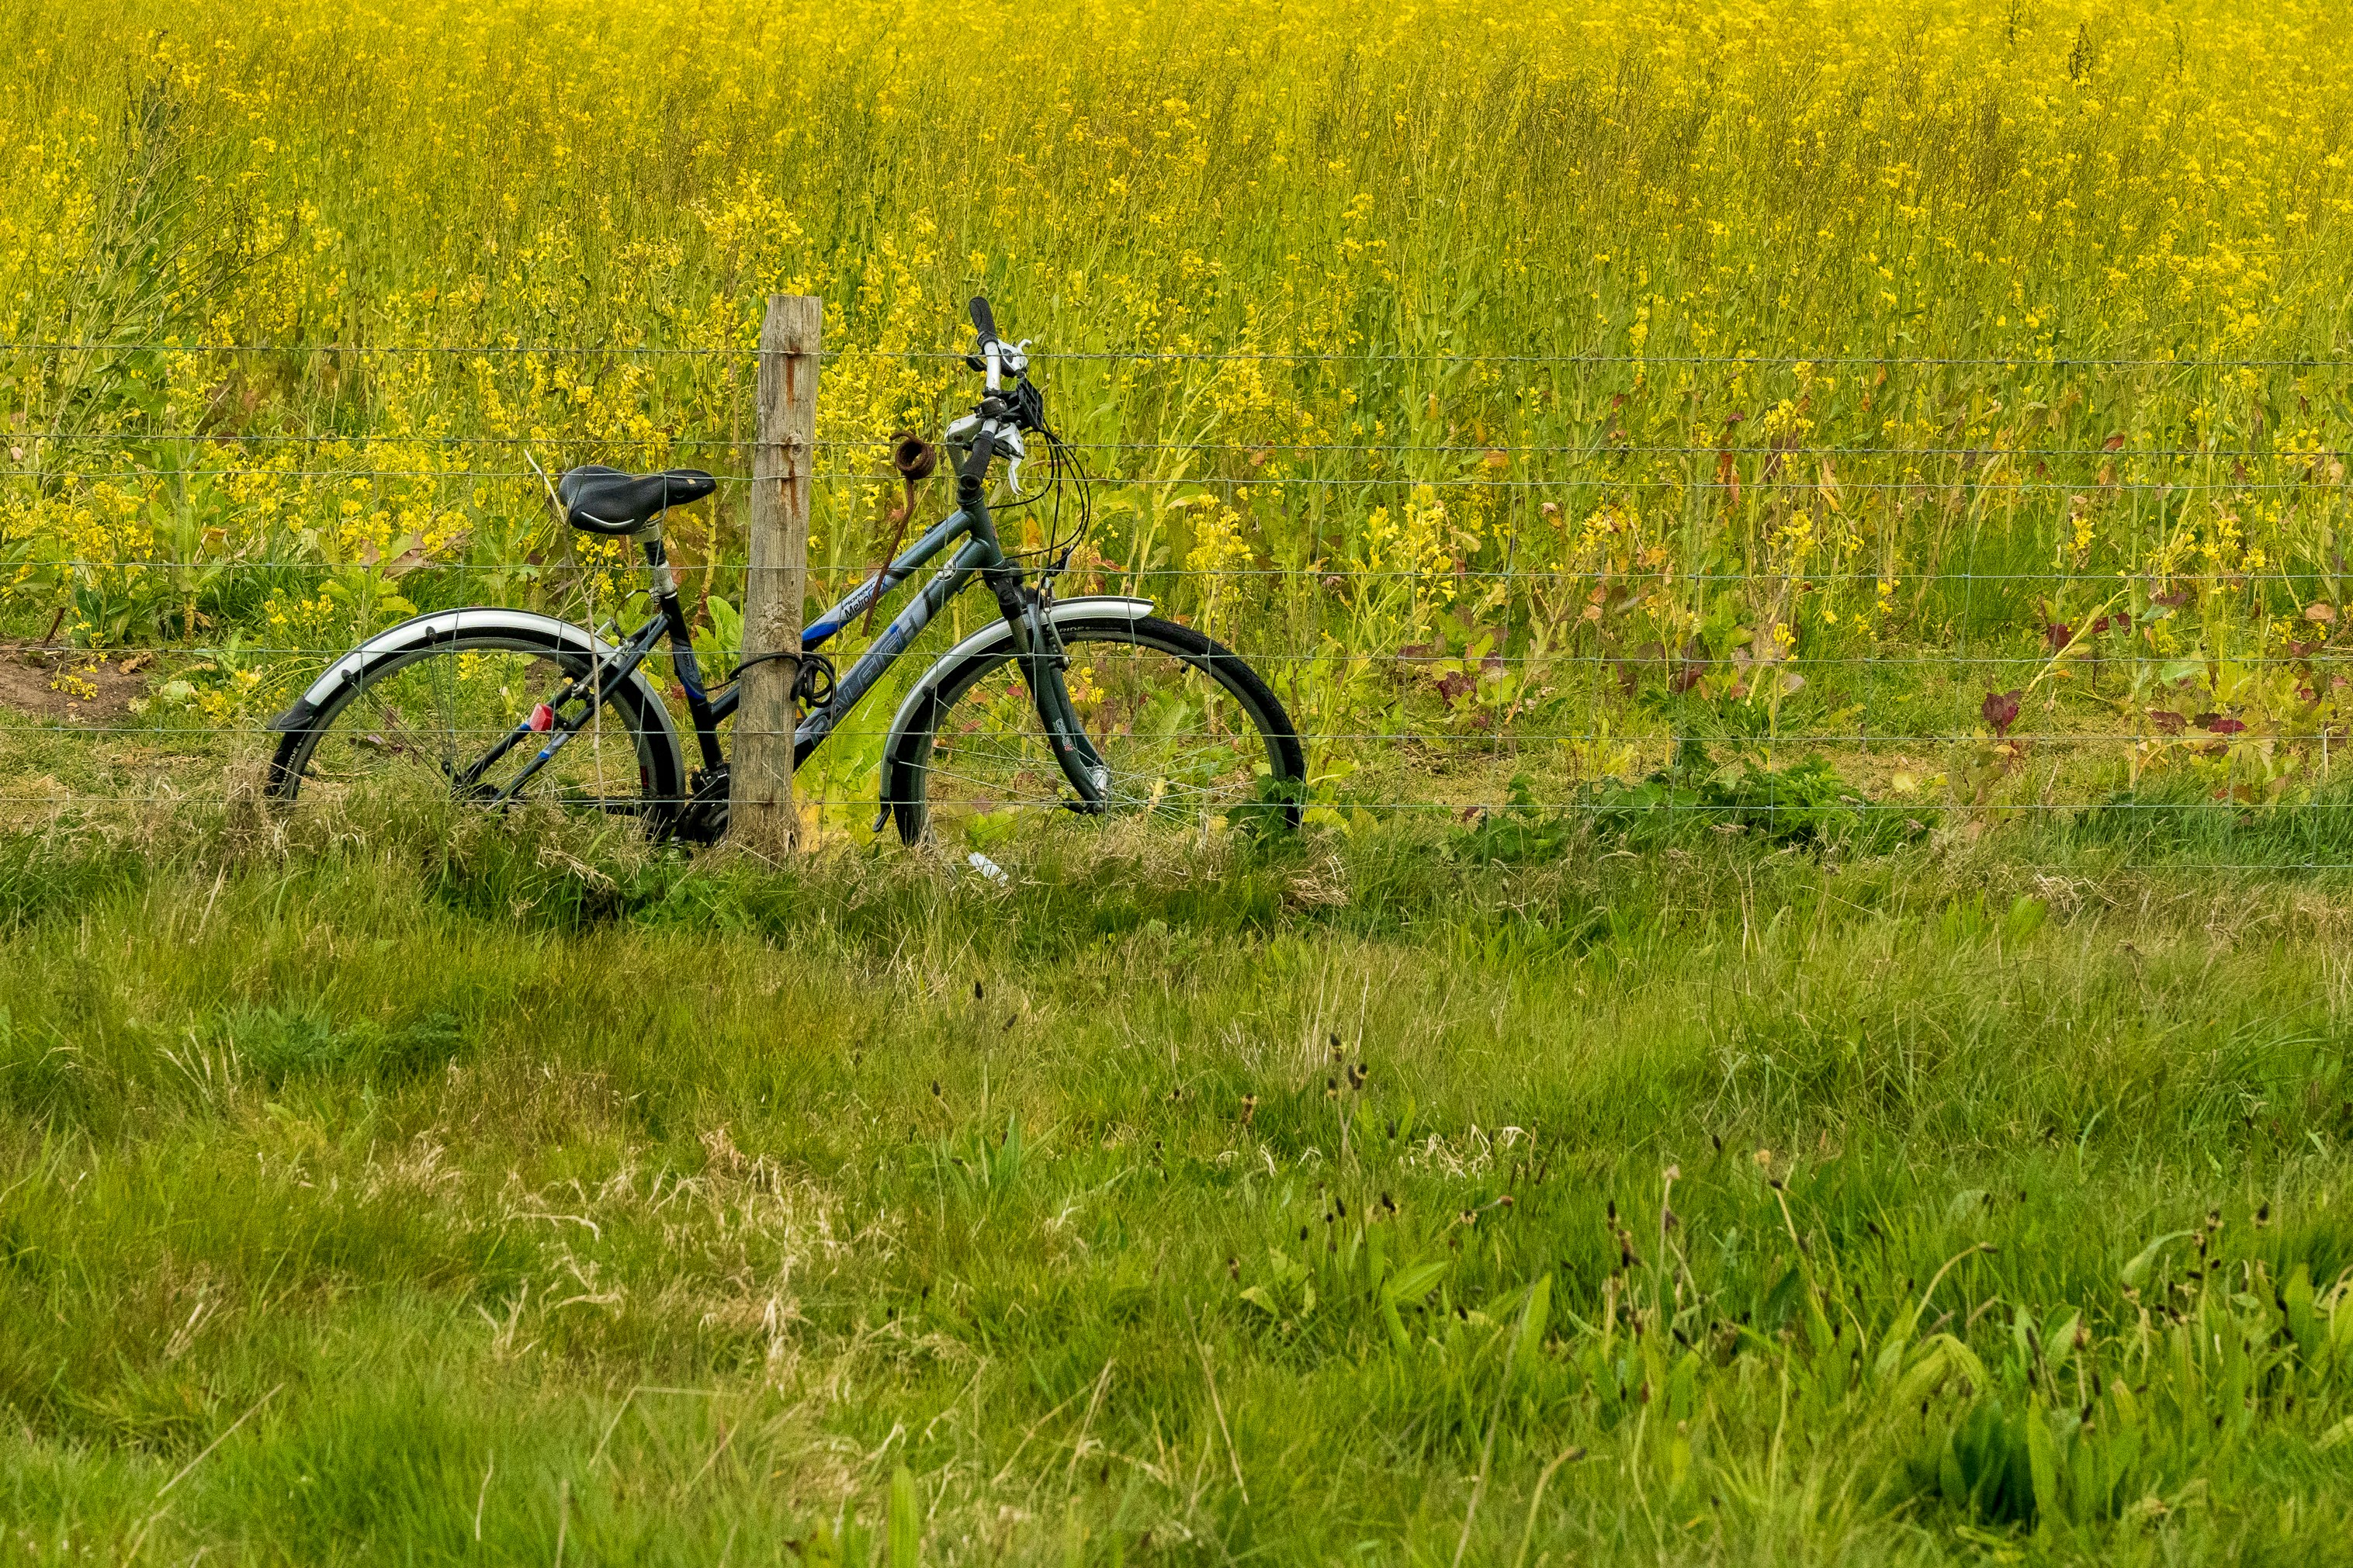 black and gray mountain bike on yellow flower field during daytime